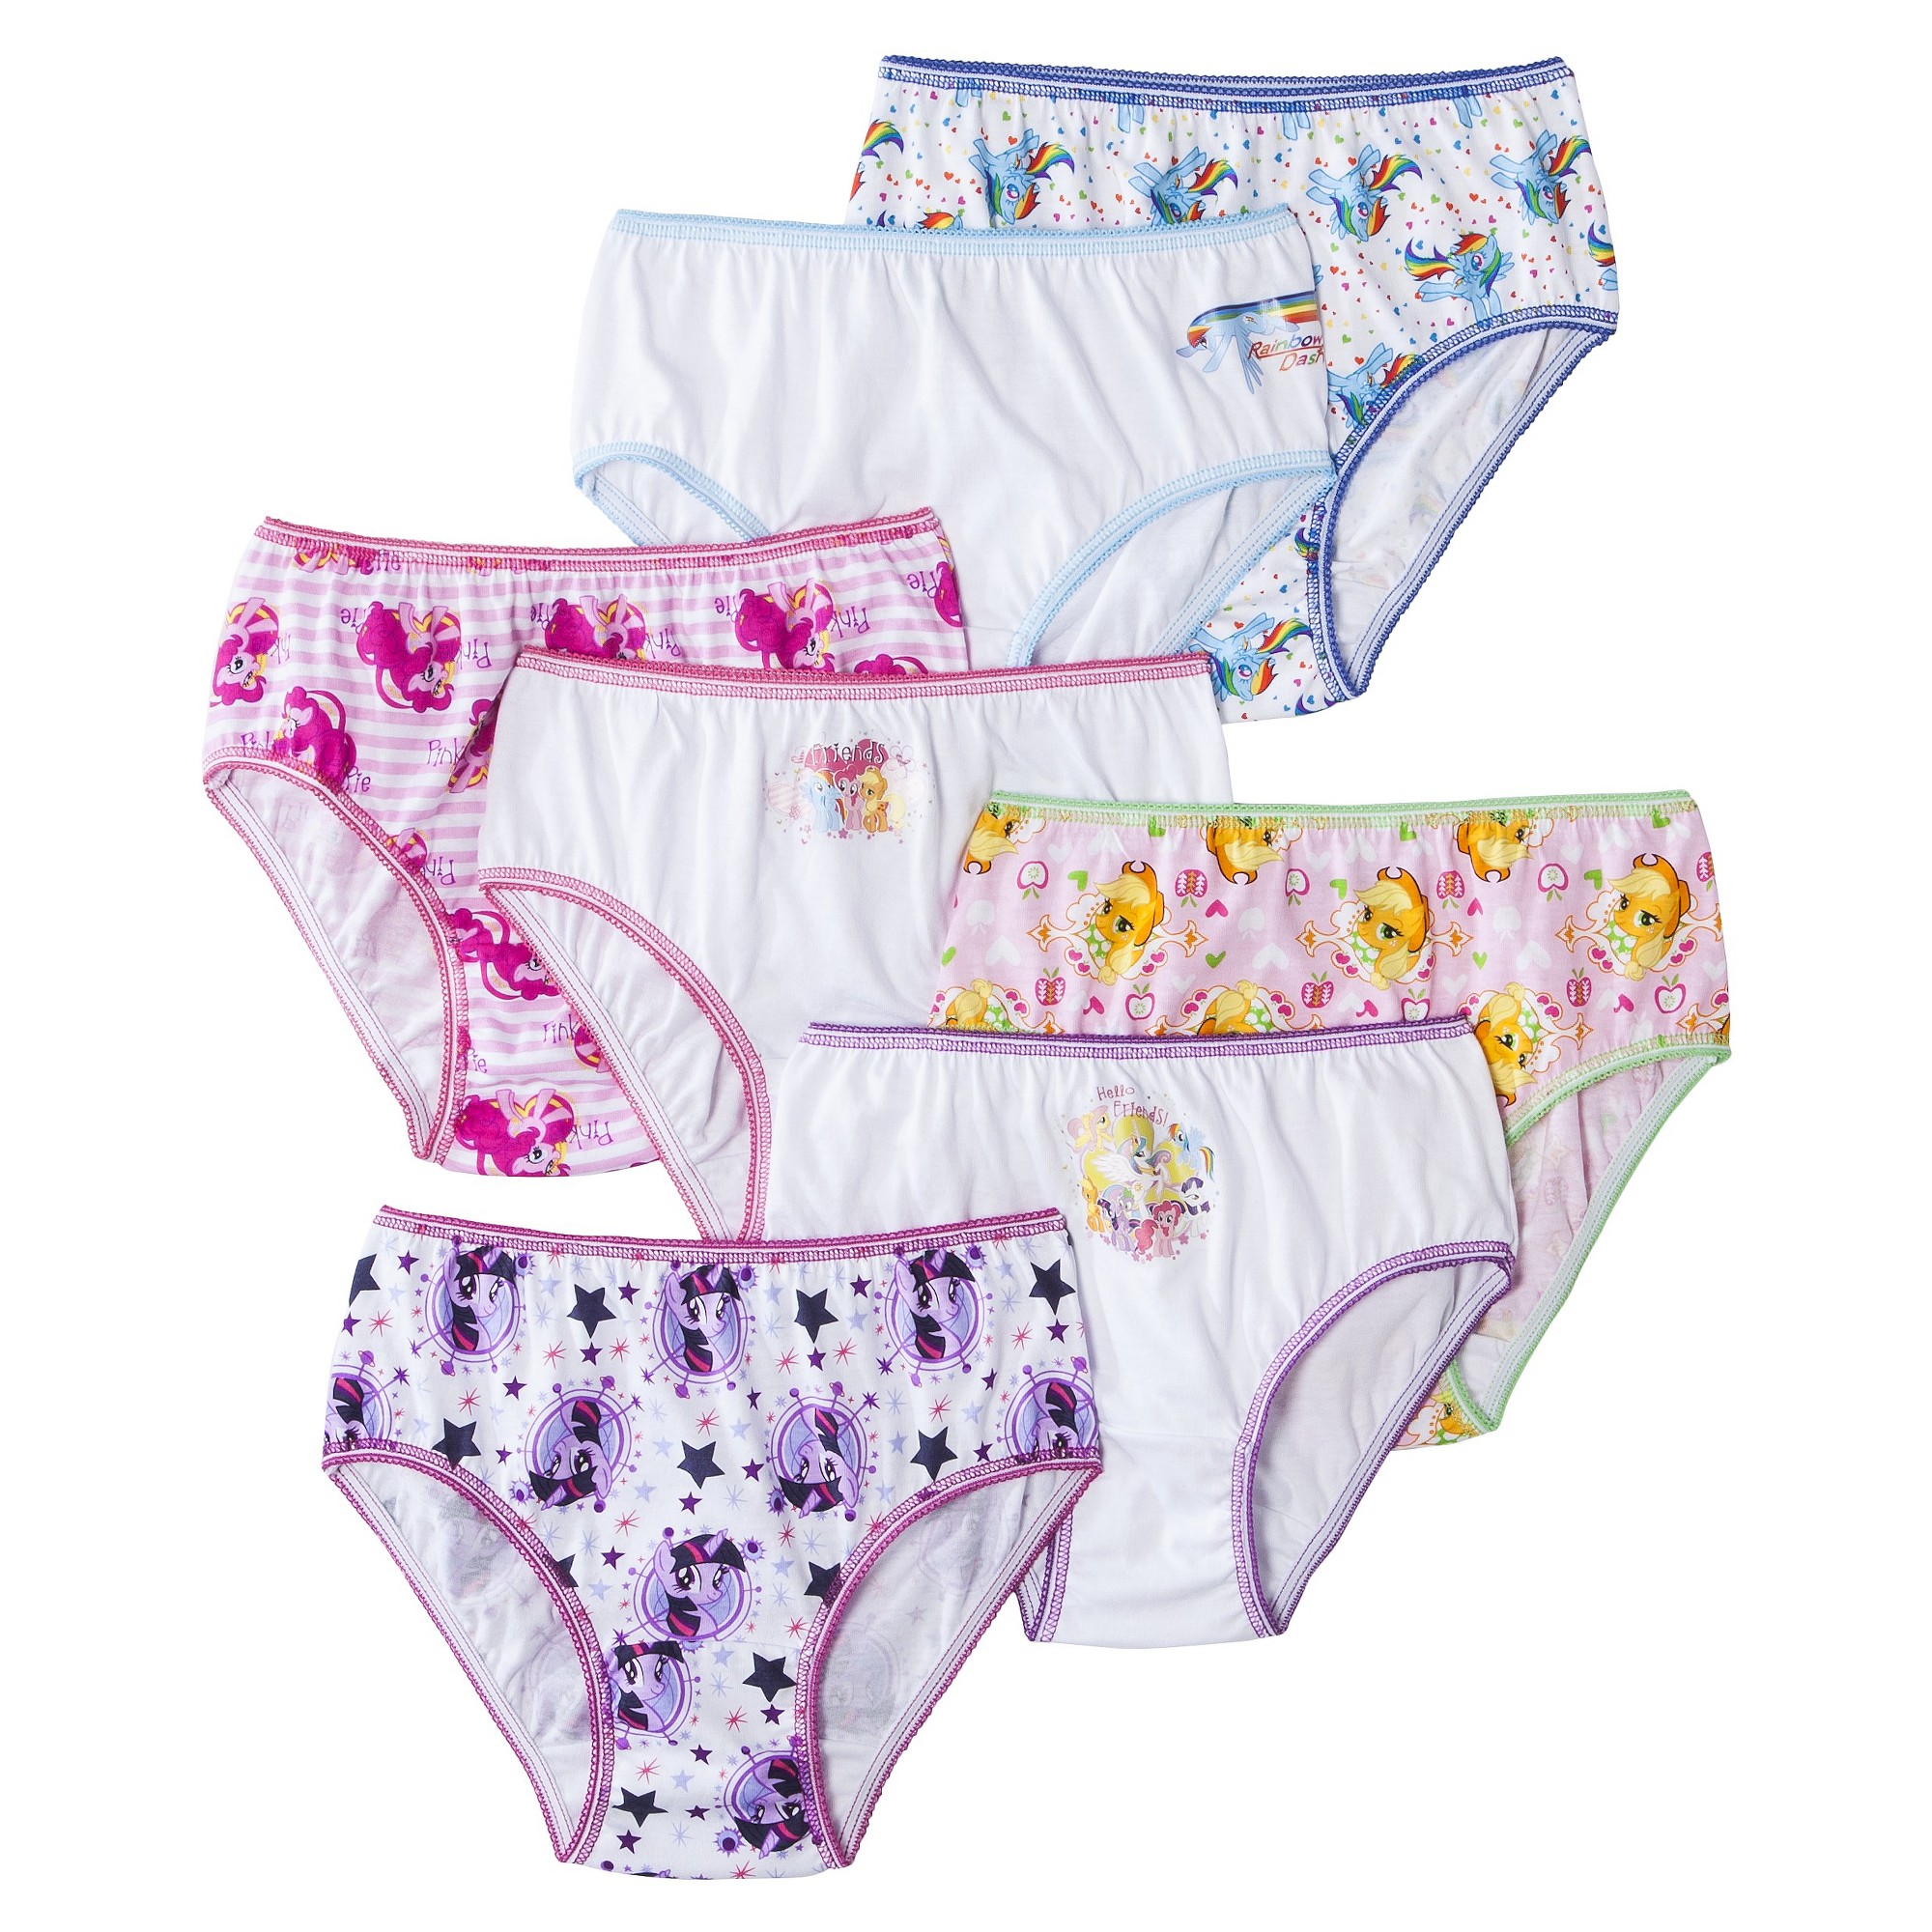 Girls' My Little Pony 7-Pack Assorted Underwear - Multi M, Girl's, Size: 6,  MultiColored, by My Little Pony